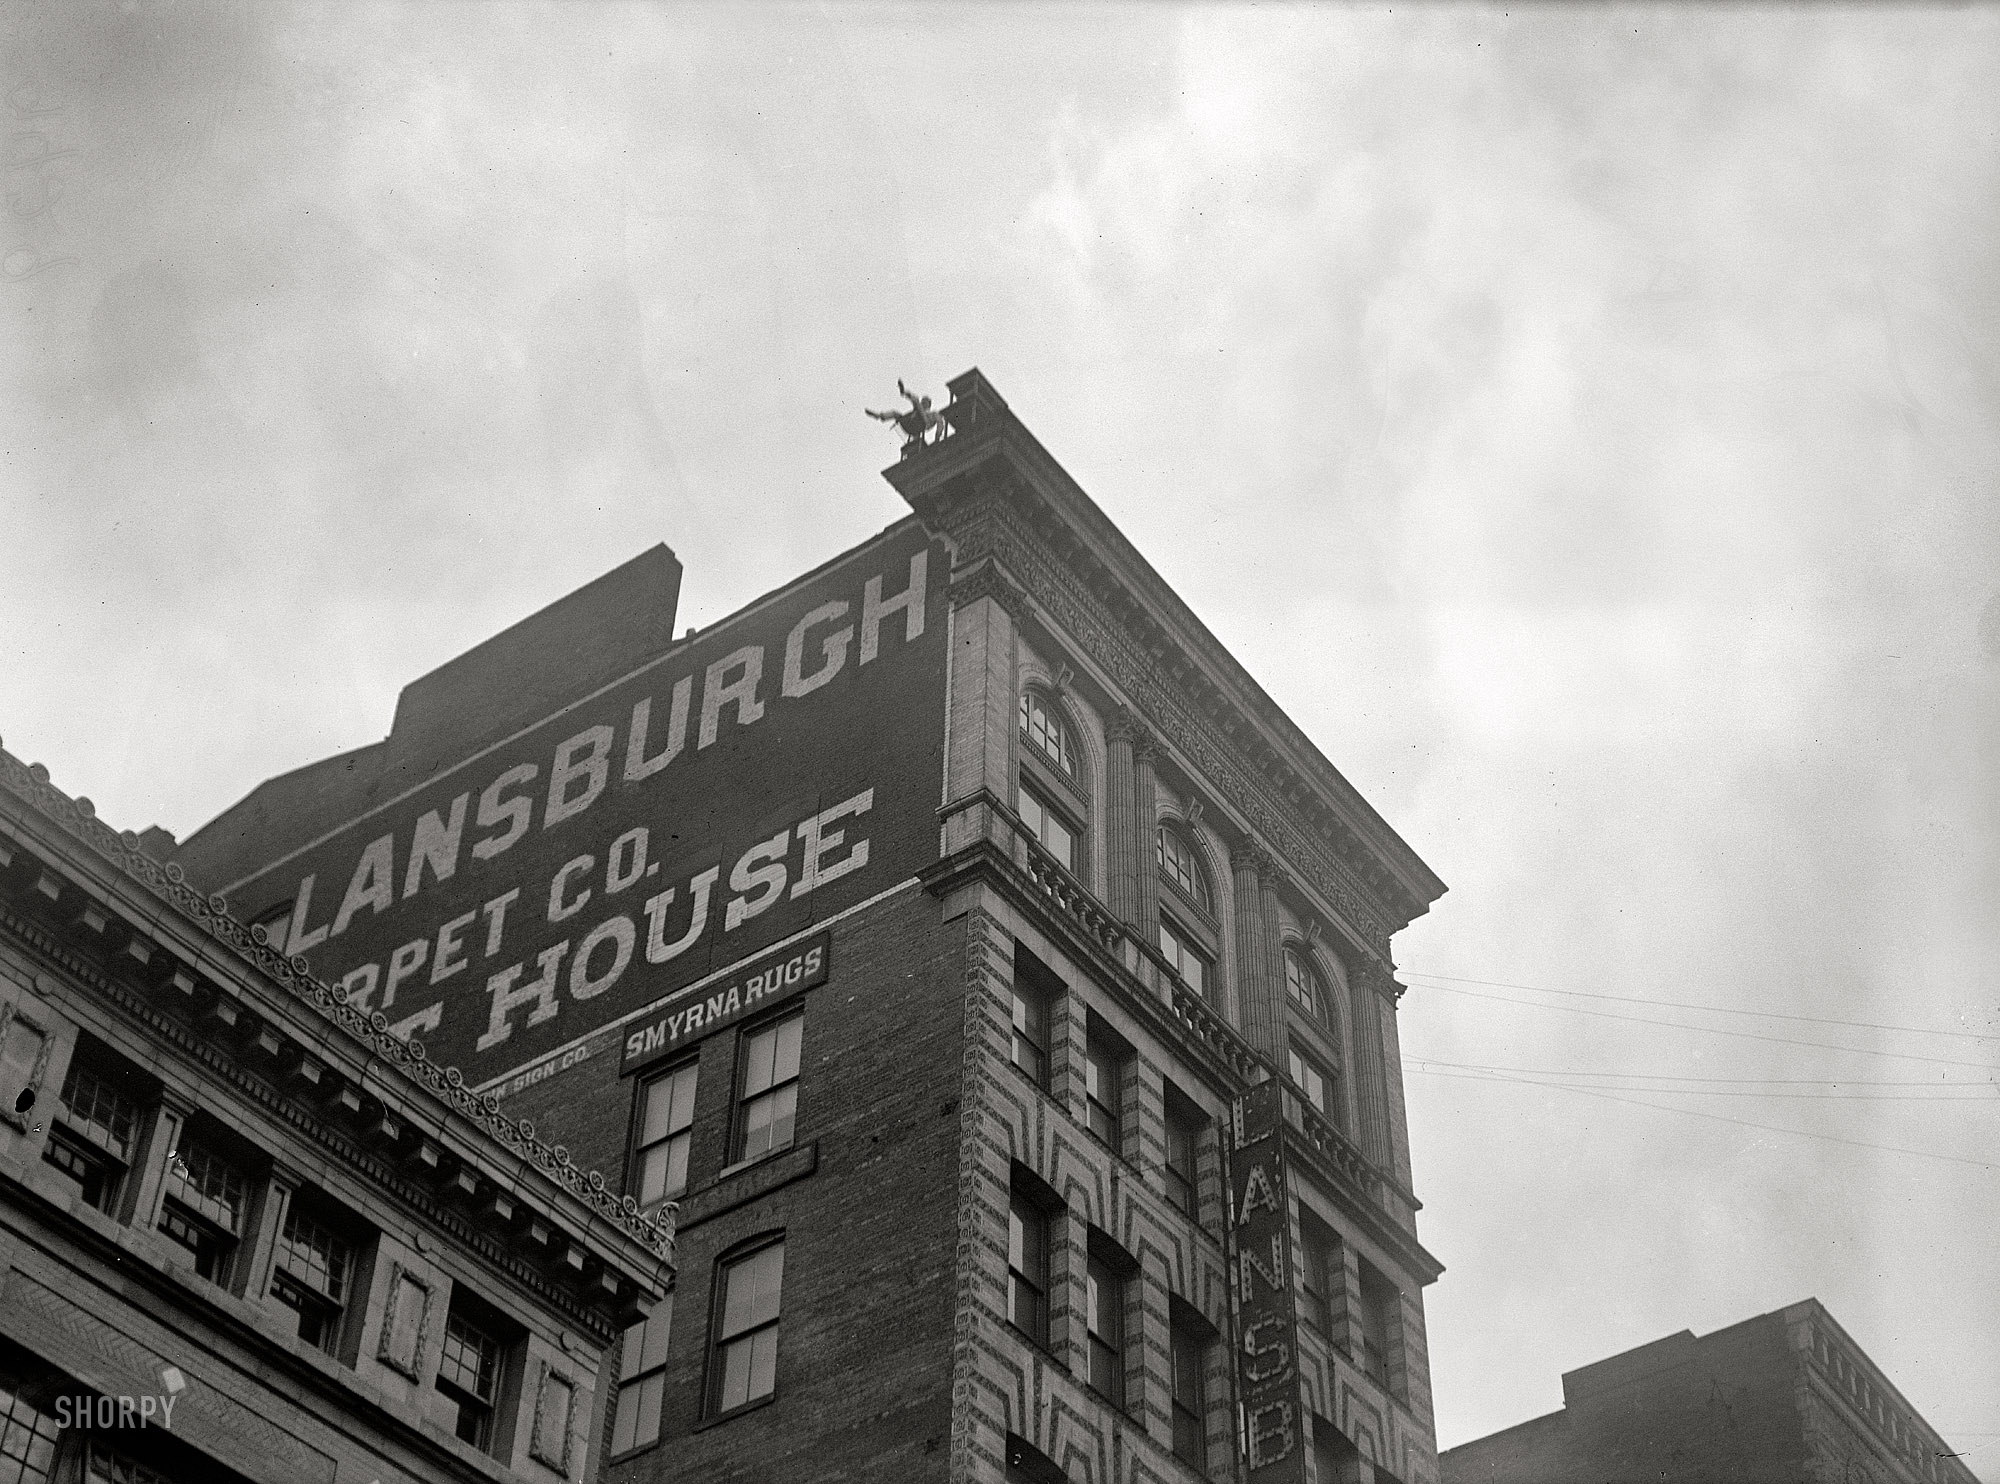 Everything must go! Mr. Reynolds again up on the roof of the Lansburgh furniture store in 1917. Harris & Ewing Collection glass negative. View full size.